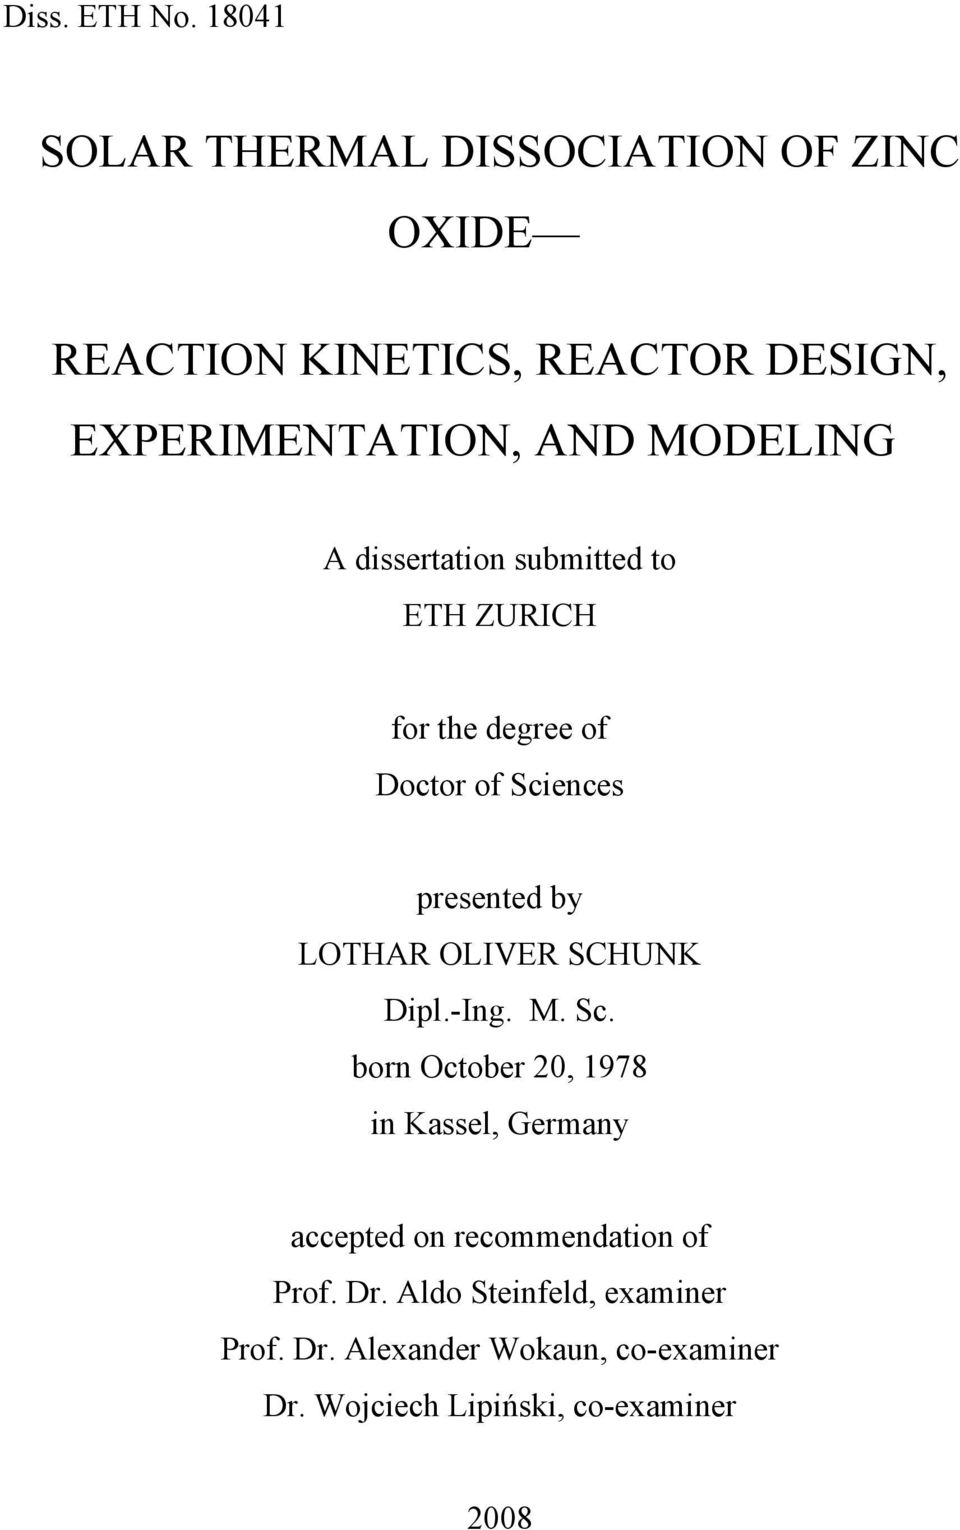 MODELING A dissertation submitted to ETH ZURICH for the degree of Doctor of Sciences presented by LOTHAR